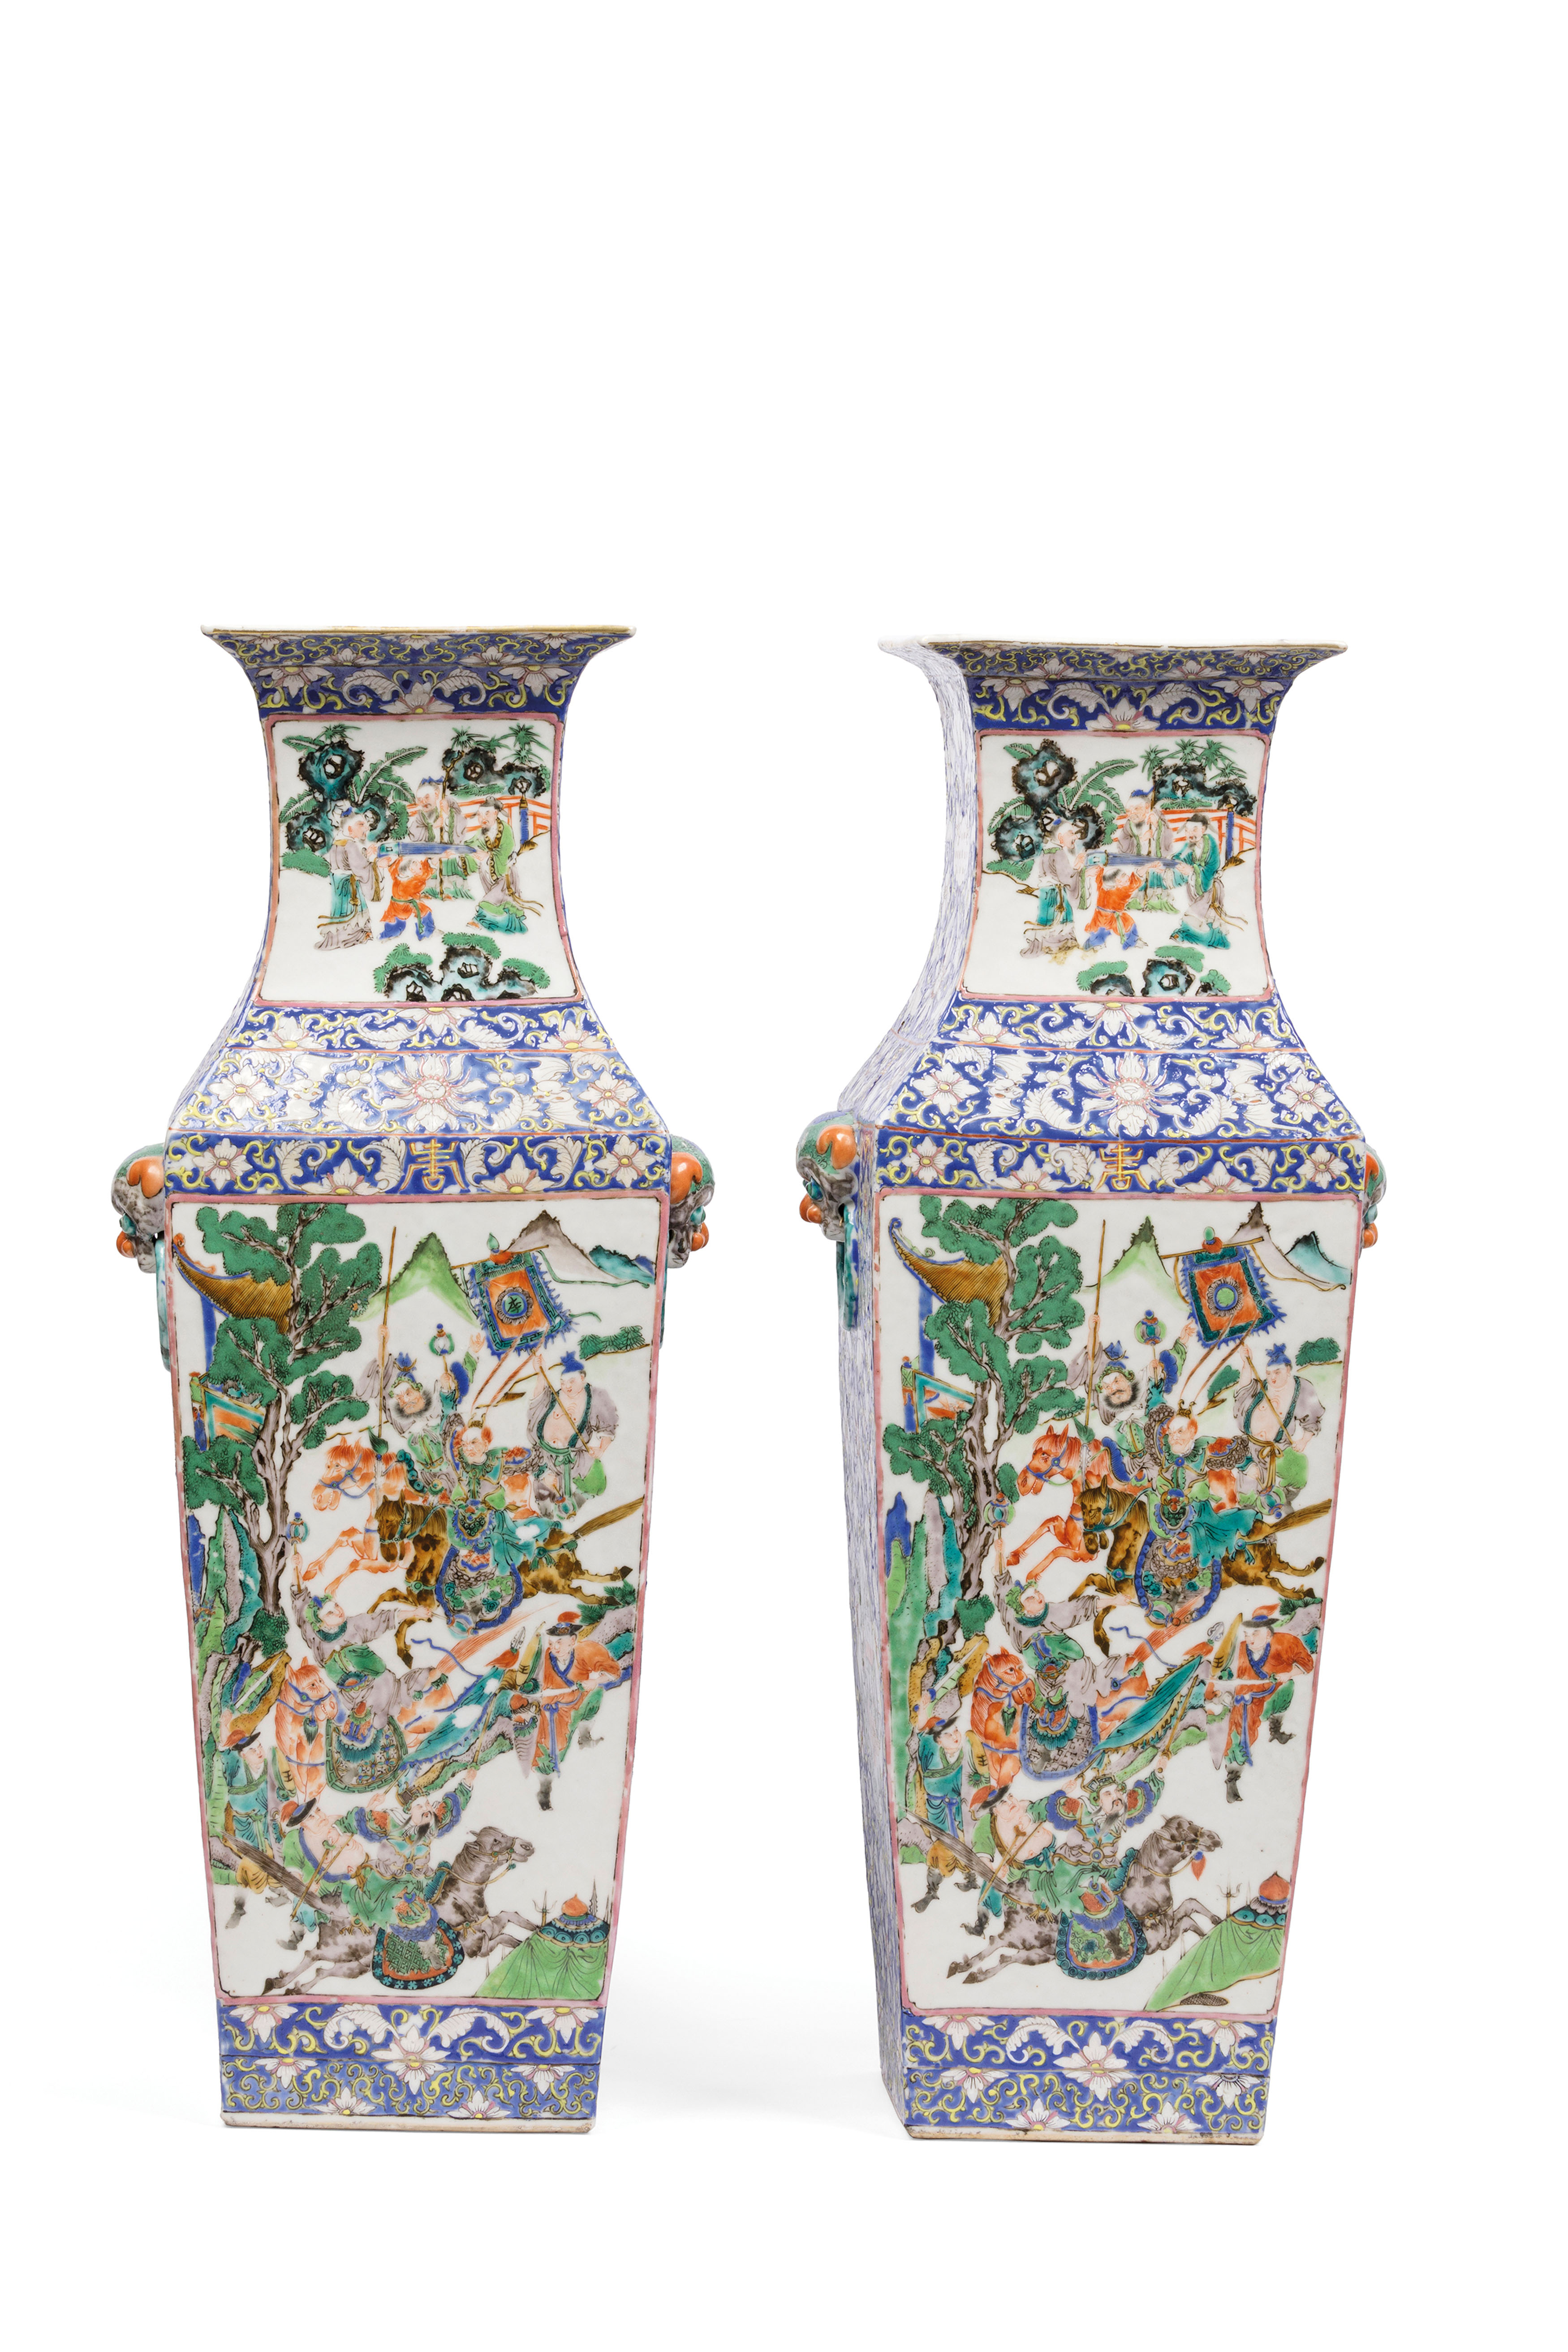 A RARE PAIR OF A LARGE FAMILLE VERT AND BLUE-GROUND PORCELAIN SQUARE VASES, CHINA, 19TH CENTURY (2) - Image 2 of 6